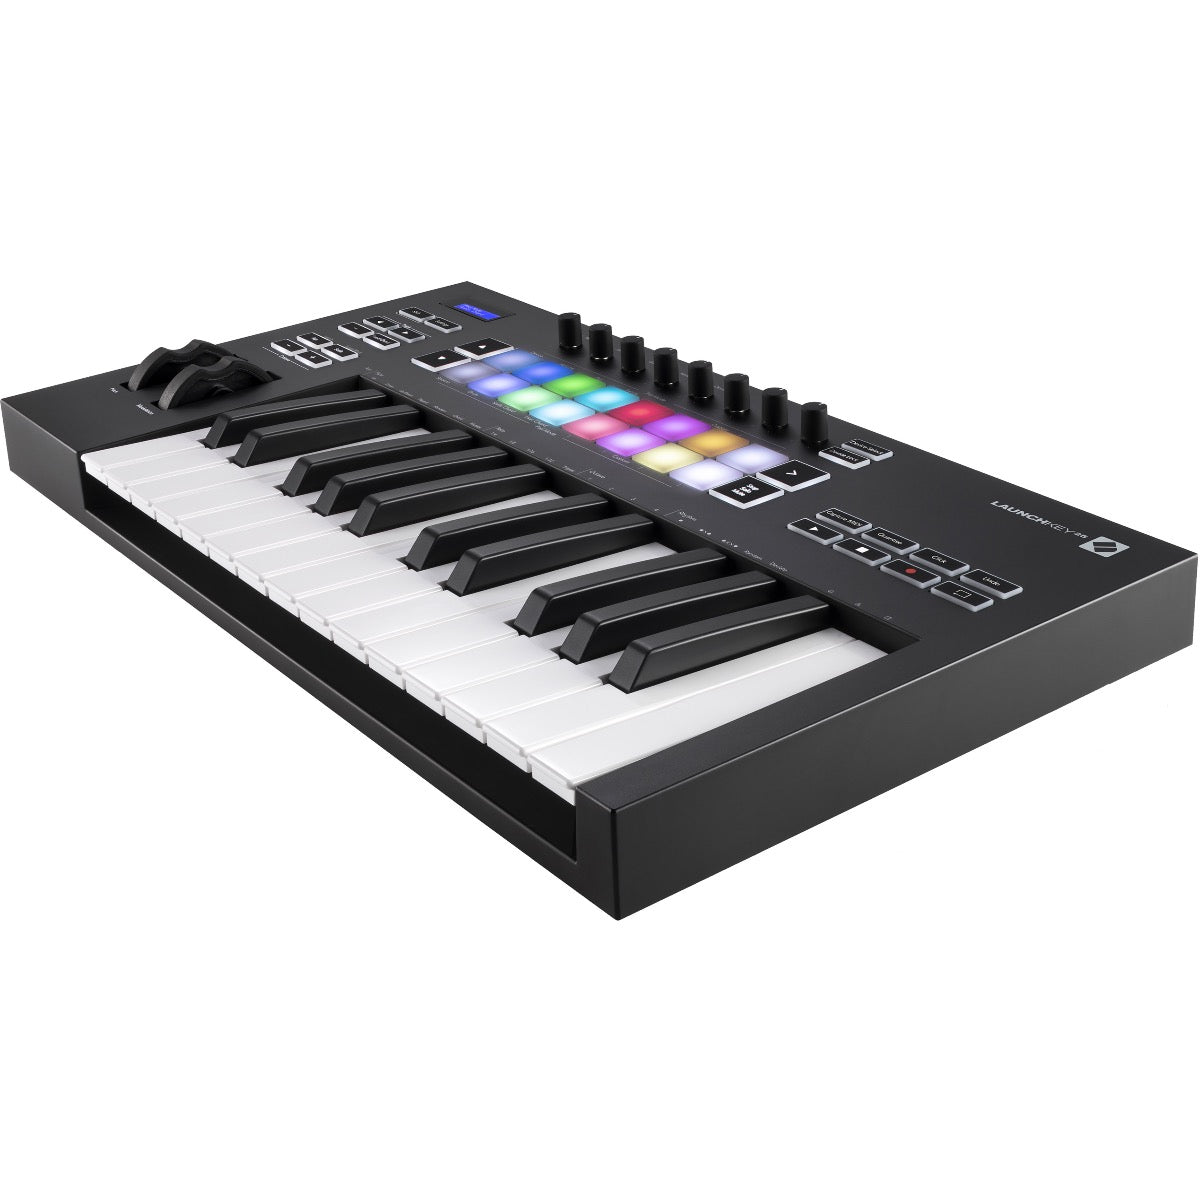 3/4 view of Novation Launchkey 25 MK3 Keyboard Controller showing top, front and right side